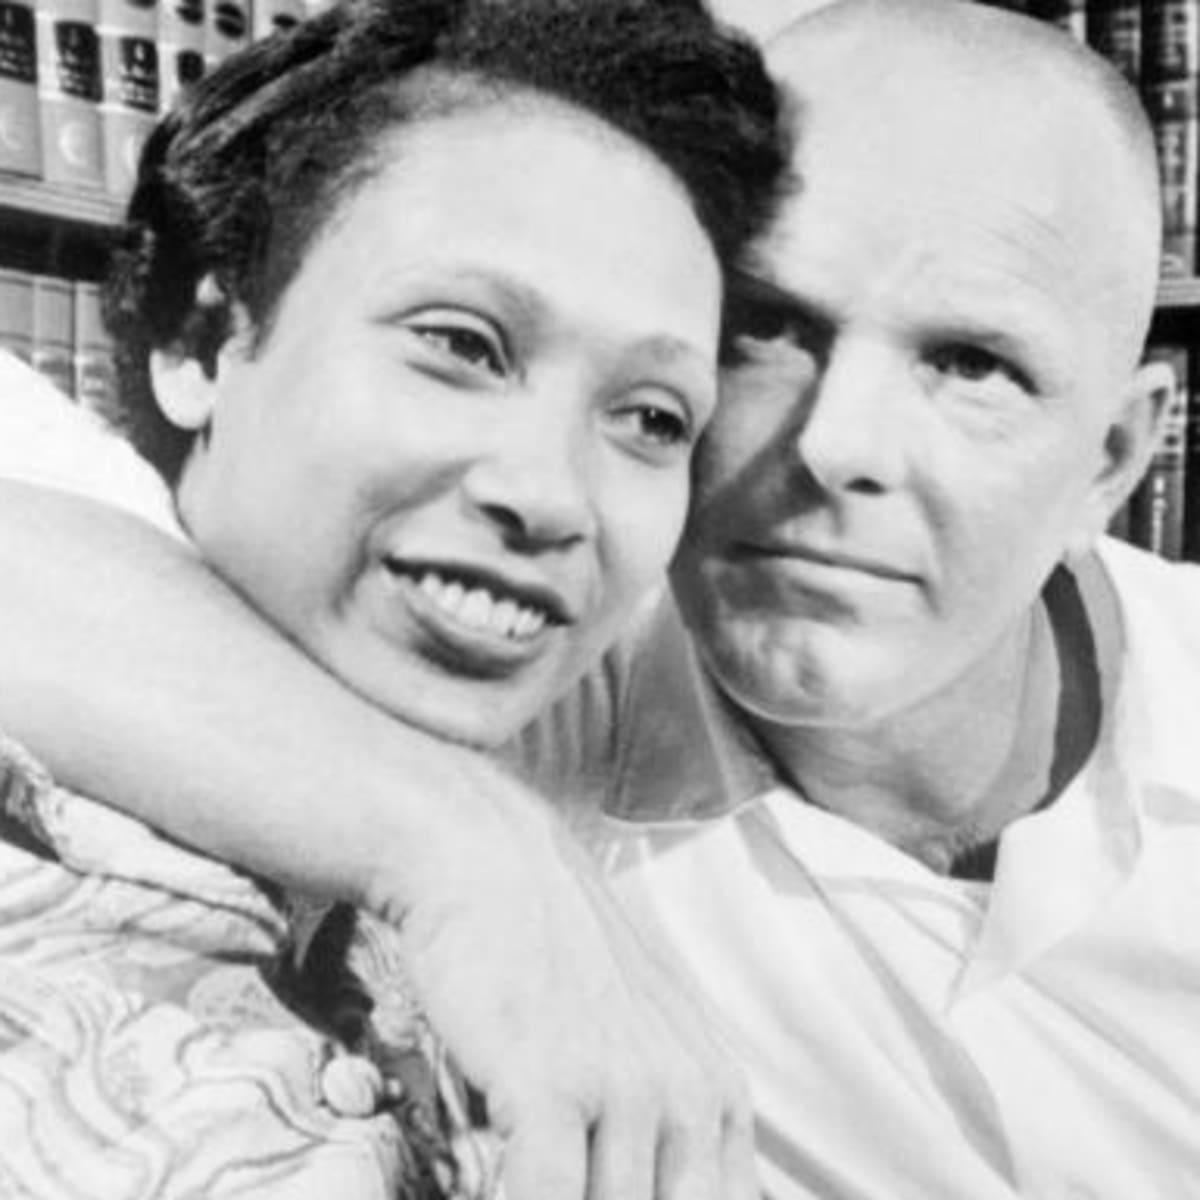 Black and white photo of author Richard and Mildred Loving